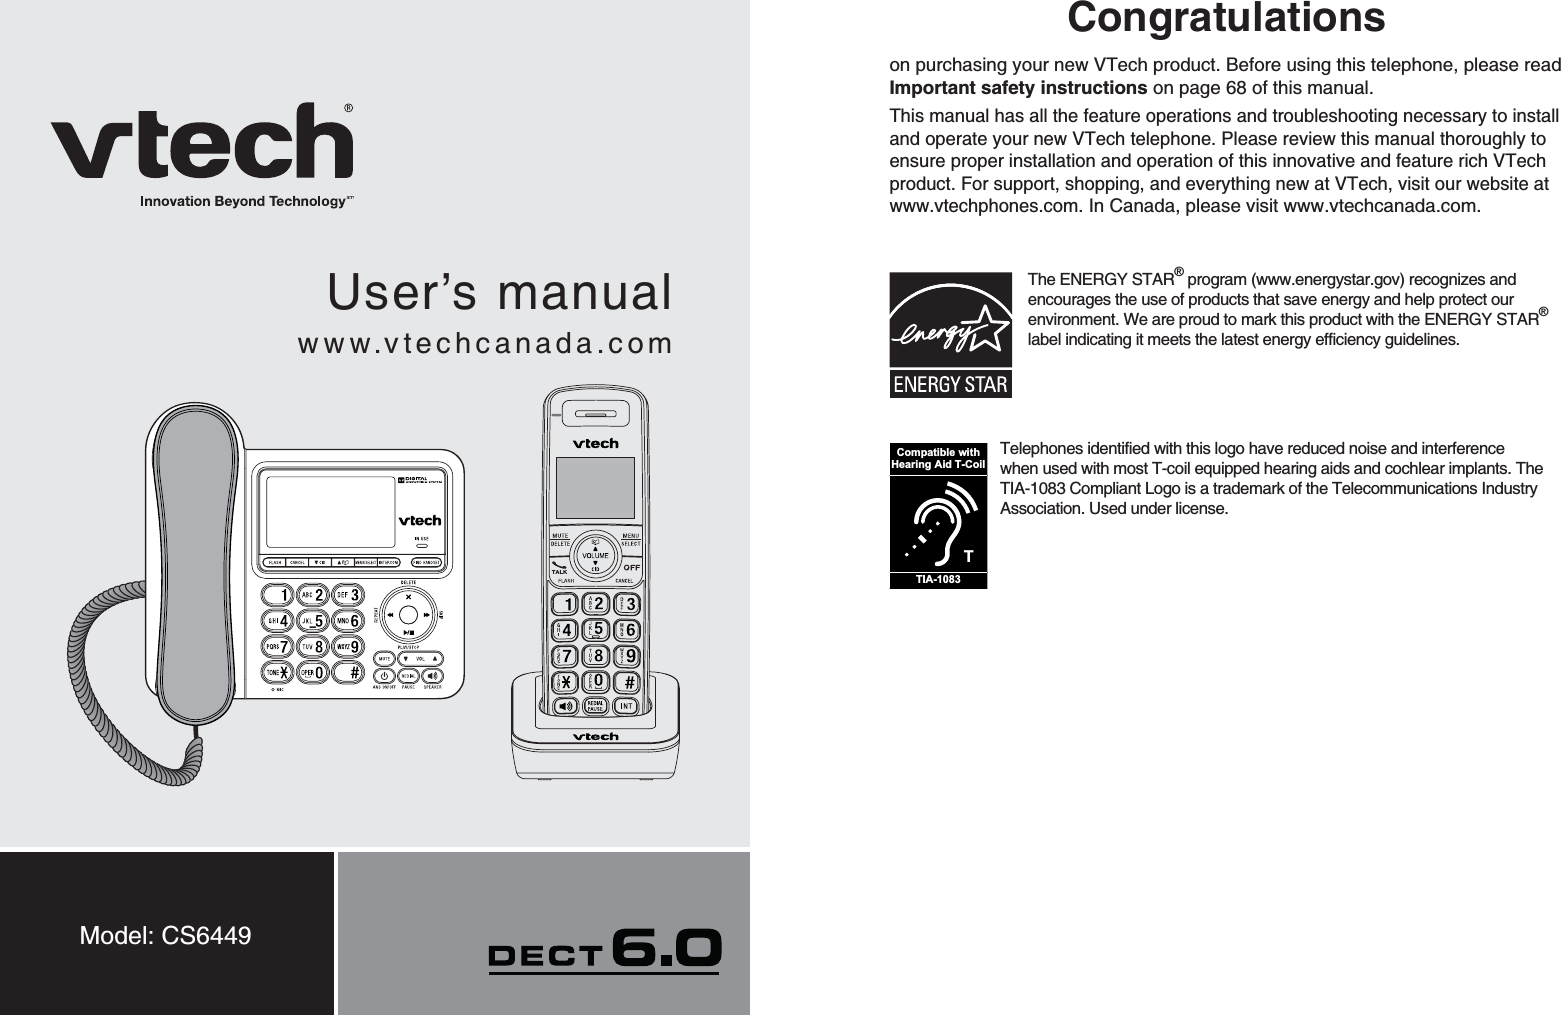 User’s manualwww.vtechcanada.comModel: CS6449Congratulationson purchasing your new VTech product. Before using this telephone, please read Important safety instructions on page 68 of this manual.This manual has all the feature operations and troubleshooting necessary to install and operate your new VTech telephone. Please review this manual thoroughly to ensure proper installation and operation of this innovative and feature rich VTech product. For support, shopping, and everything new at VTech, visit our website at www.vtechphones.com.In Canada, please visit www.vtechcanada.com. The ENERGY STAR®program (www.energystar.gov) recognizes and encourages the use of products that save energy and help protect our environment. We are proud to mark this product with the ENERGY STAR®label indicating it meets the latest energy efficiency guidelines.TCompatible withHearing Aid T-CoilTIA-1083Telephones identified with this logo have reduced noise and interference when used with most T-coil equipped hearing aids and cochlear implants. The TIA-1083 Compliant Logo is a trademark of the Telecommunications Industry Association. Used under license.